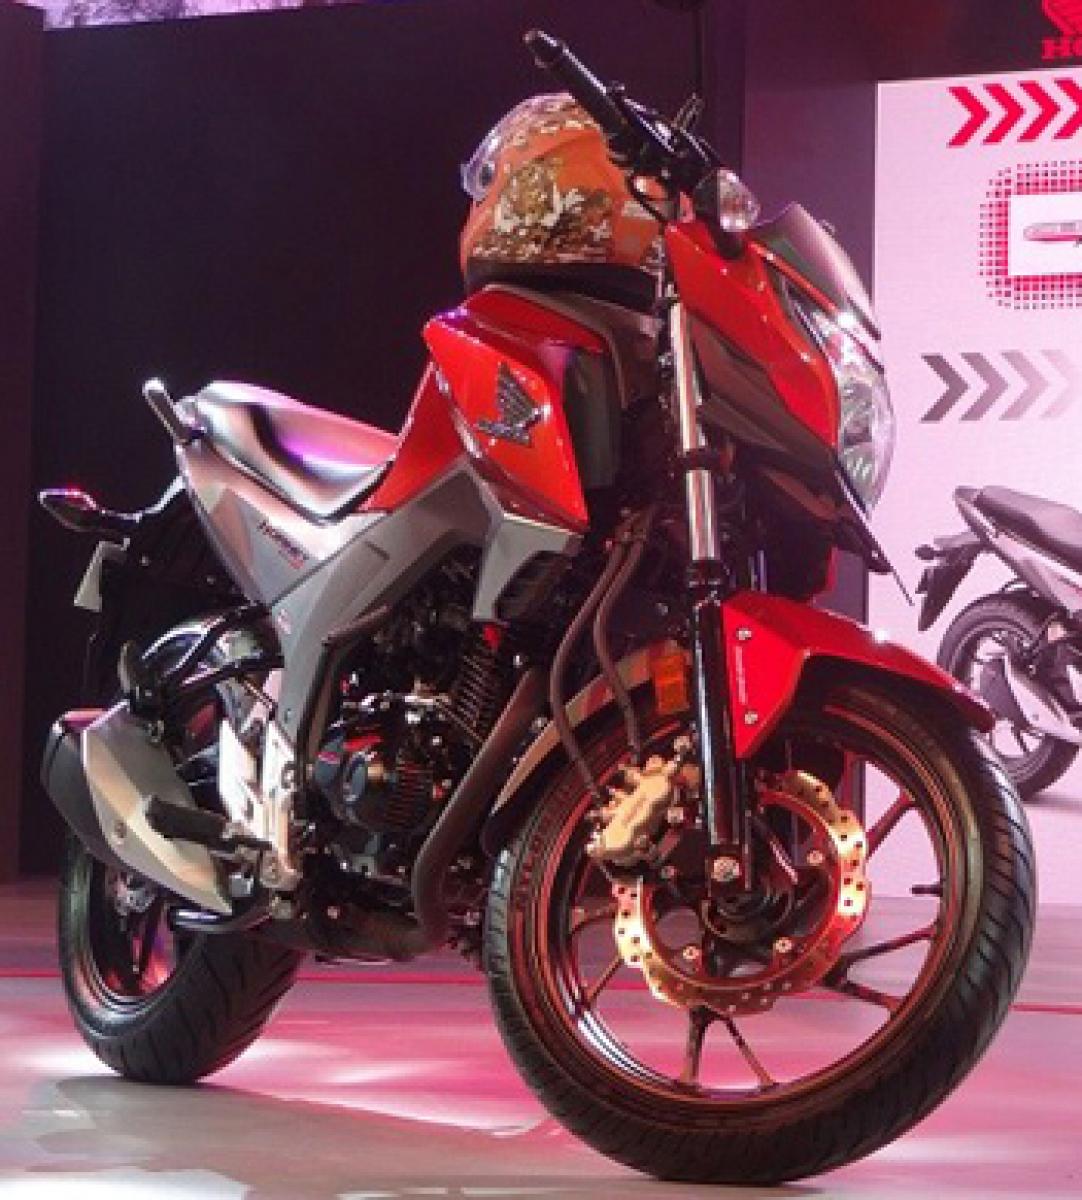 Honda India unveils CB Hornet 160R for the Indian market